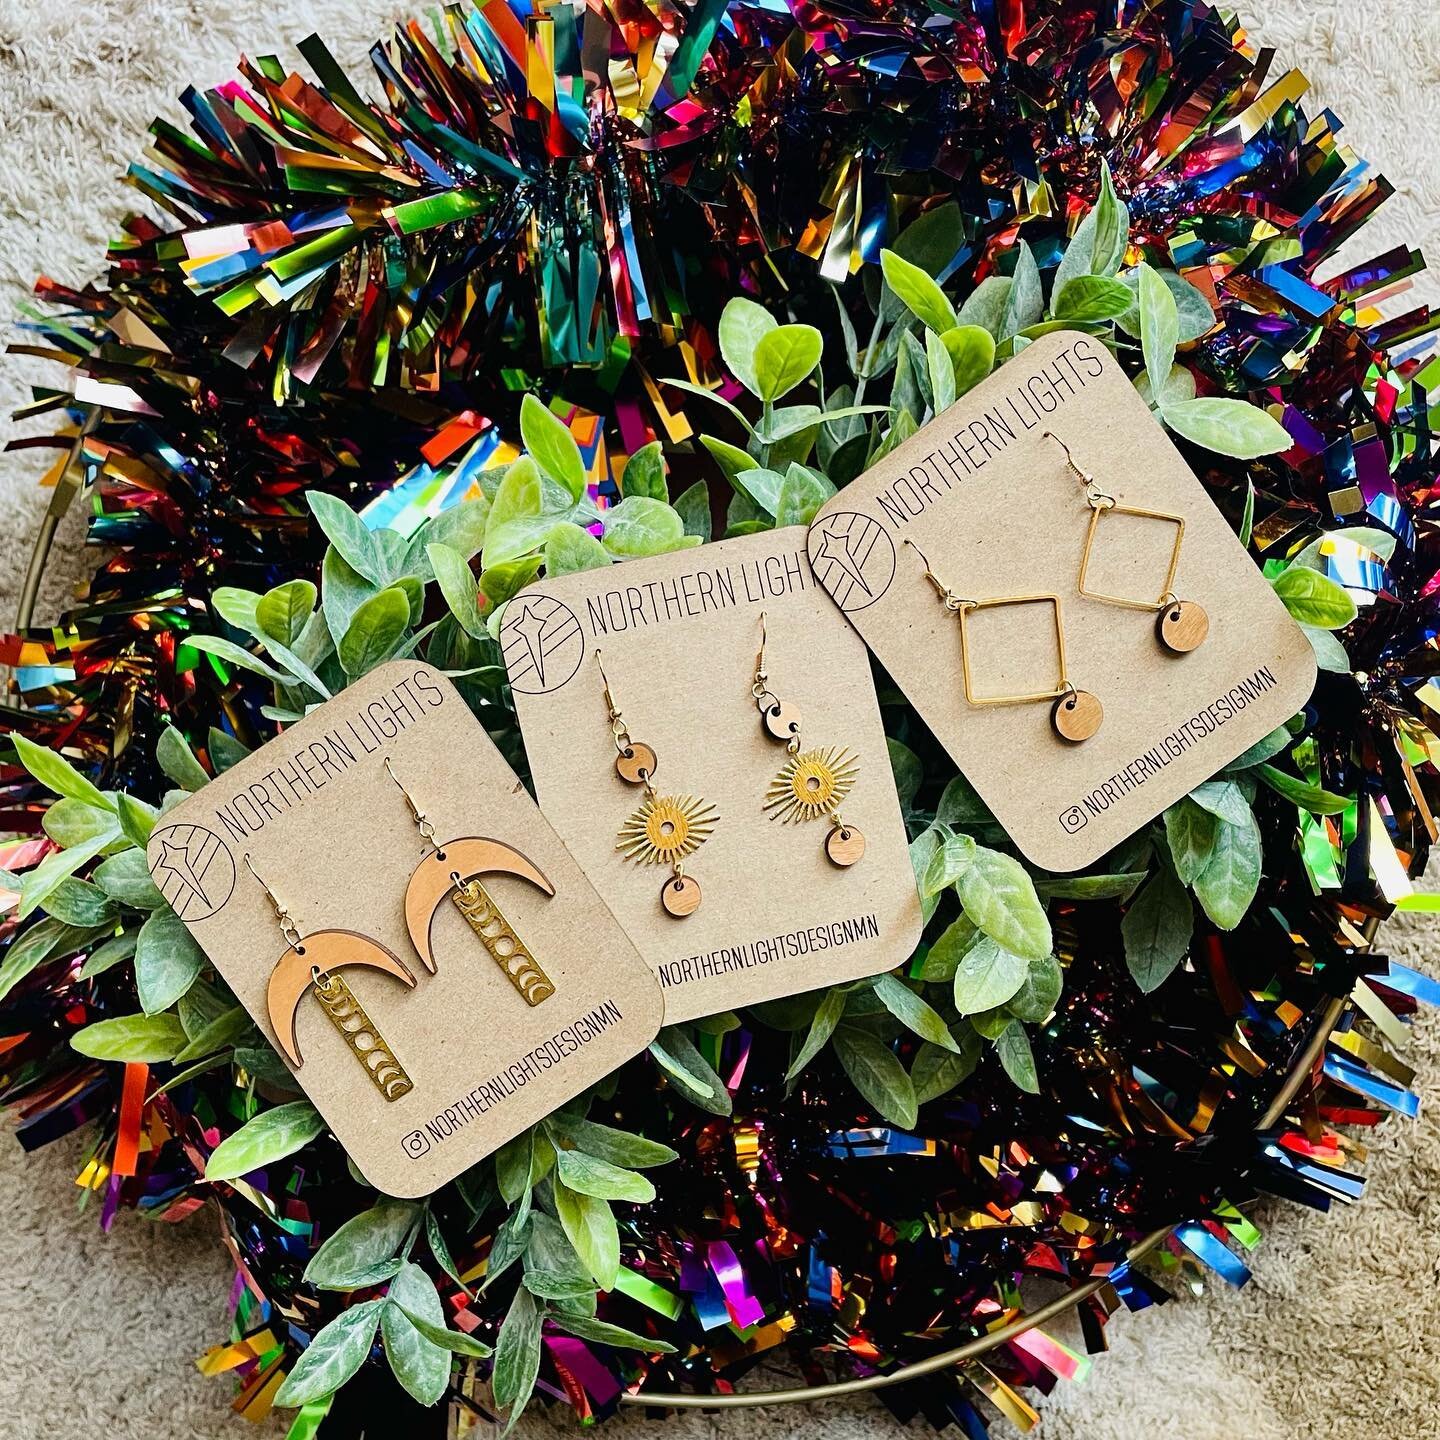 New! Gorgeous! Fun! Statement! Whatever you want to call them isn&rsquo;t wrong, but we just want them in your ears! 
.
.
. 
#shopsmall #shoplocal #mnmade 
#minnesotamaker #northernlightsdesign #smallbusiness #lasercut #mnlove #glowforgemade #glowfor